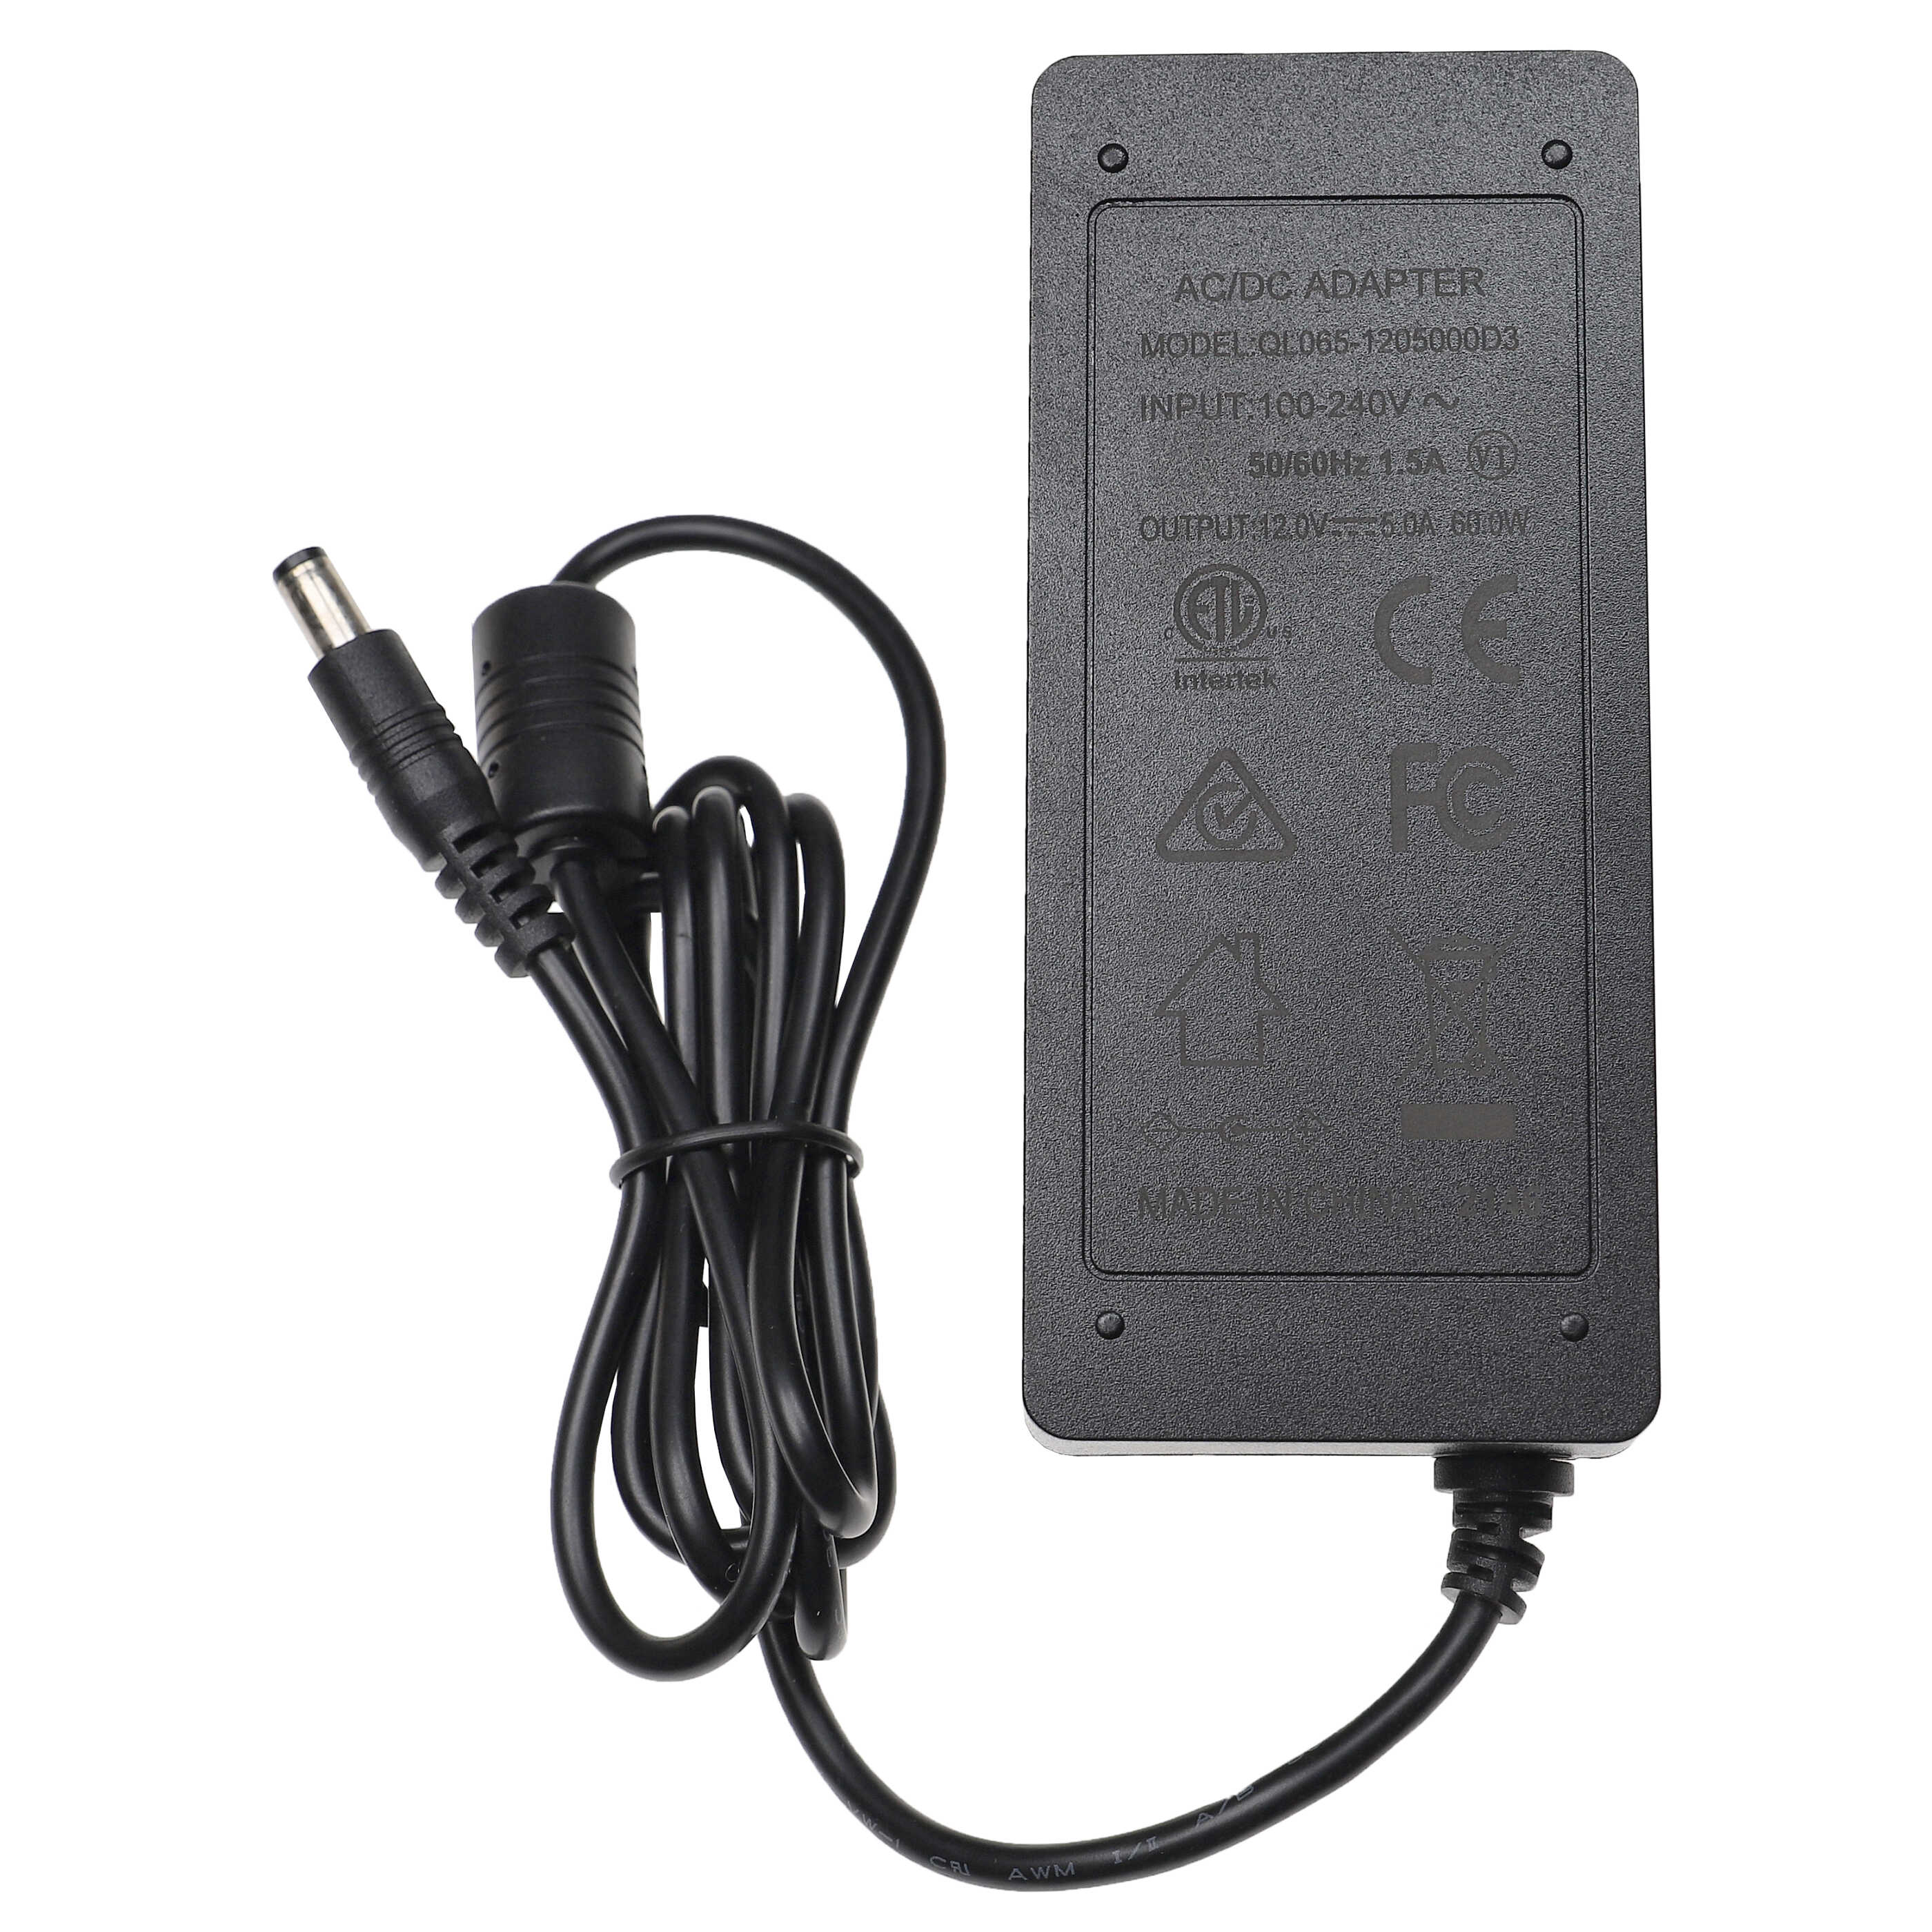 Charger + Mains Adapter Suitable for Motorola NNTN5510 Radio Batteries, 0.4 A